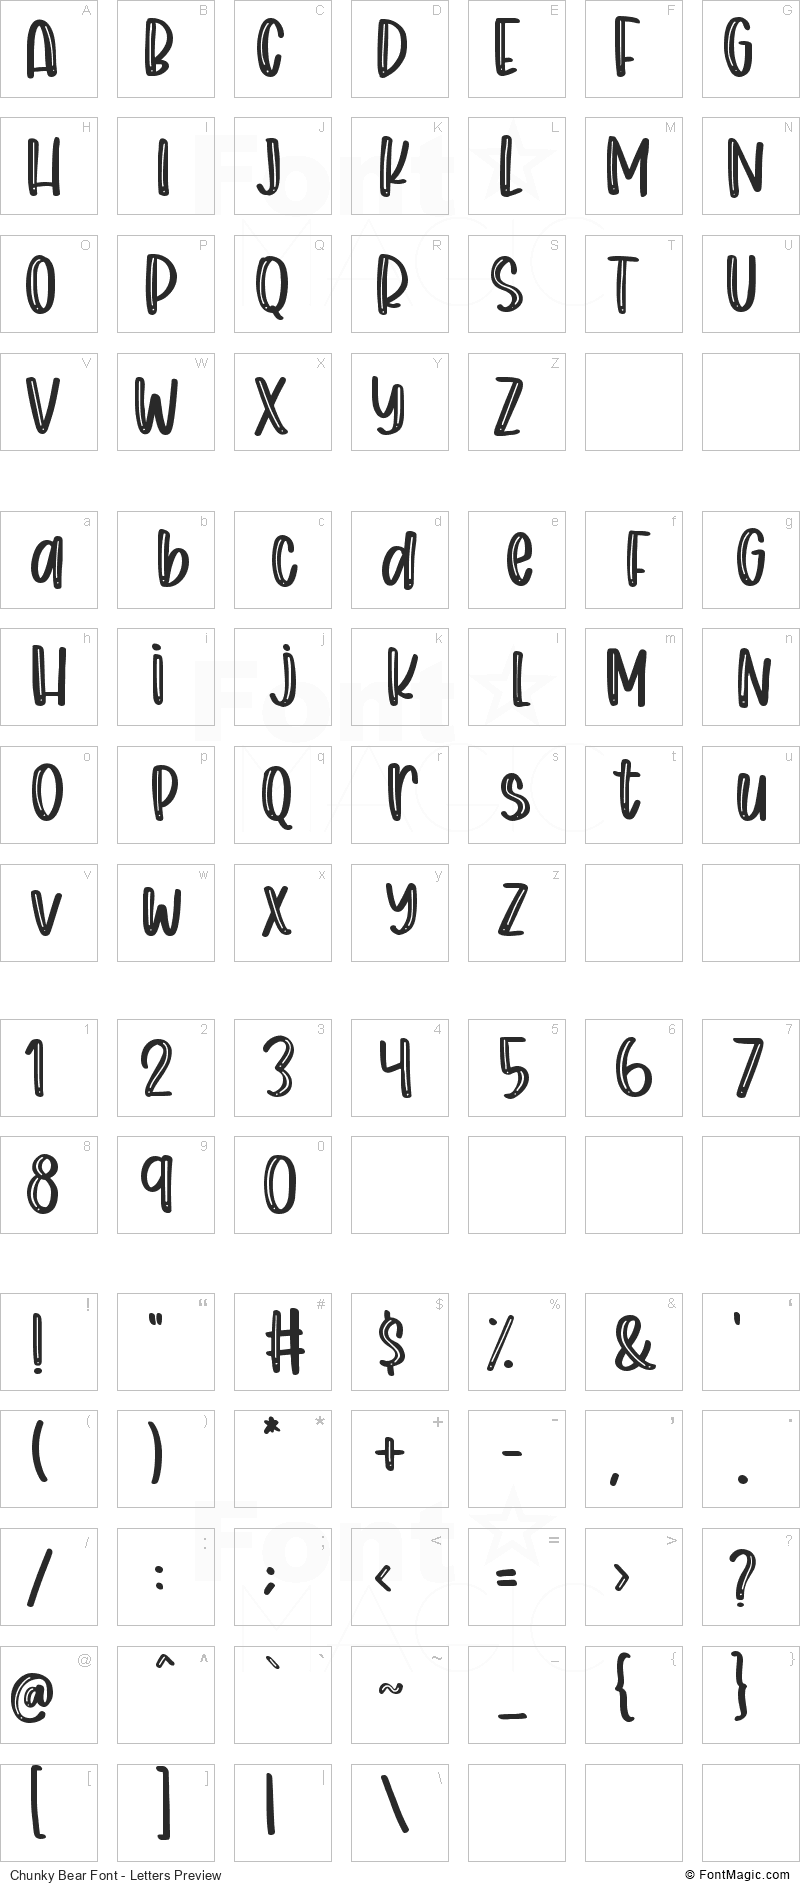 Chunky Bear Font - All Latters Preview Chart